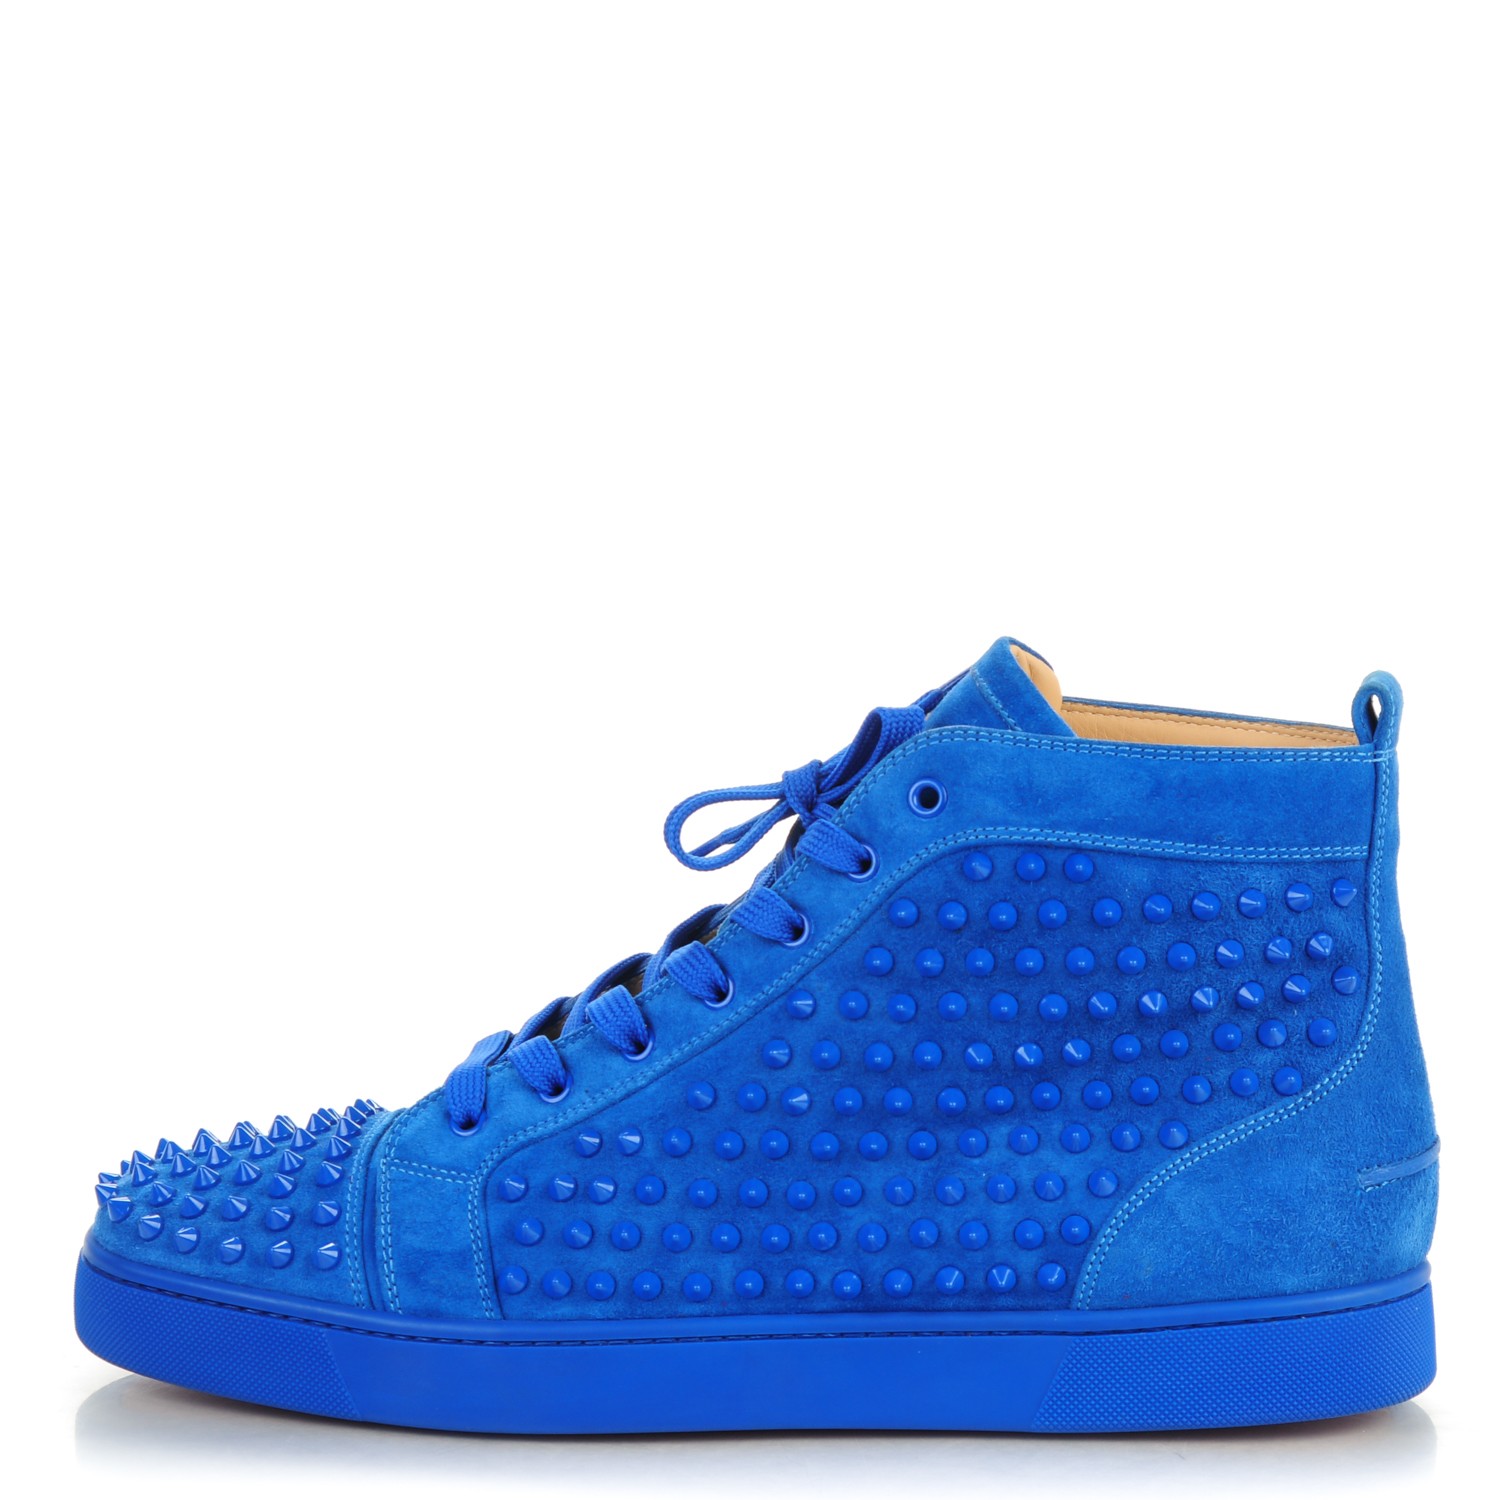 christian louboutin mens suede